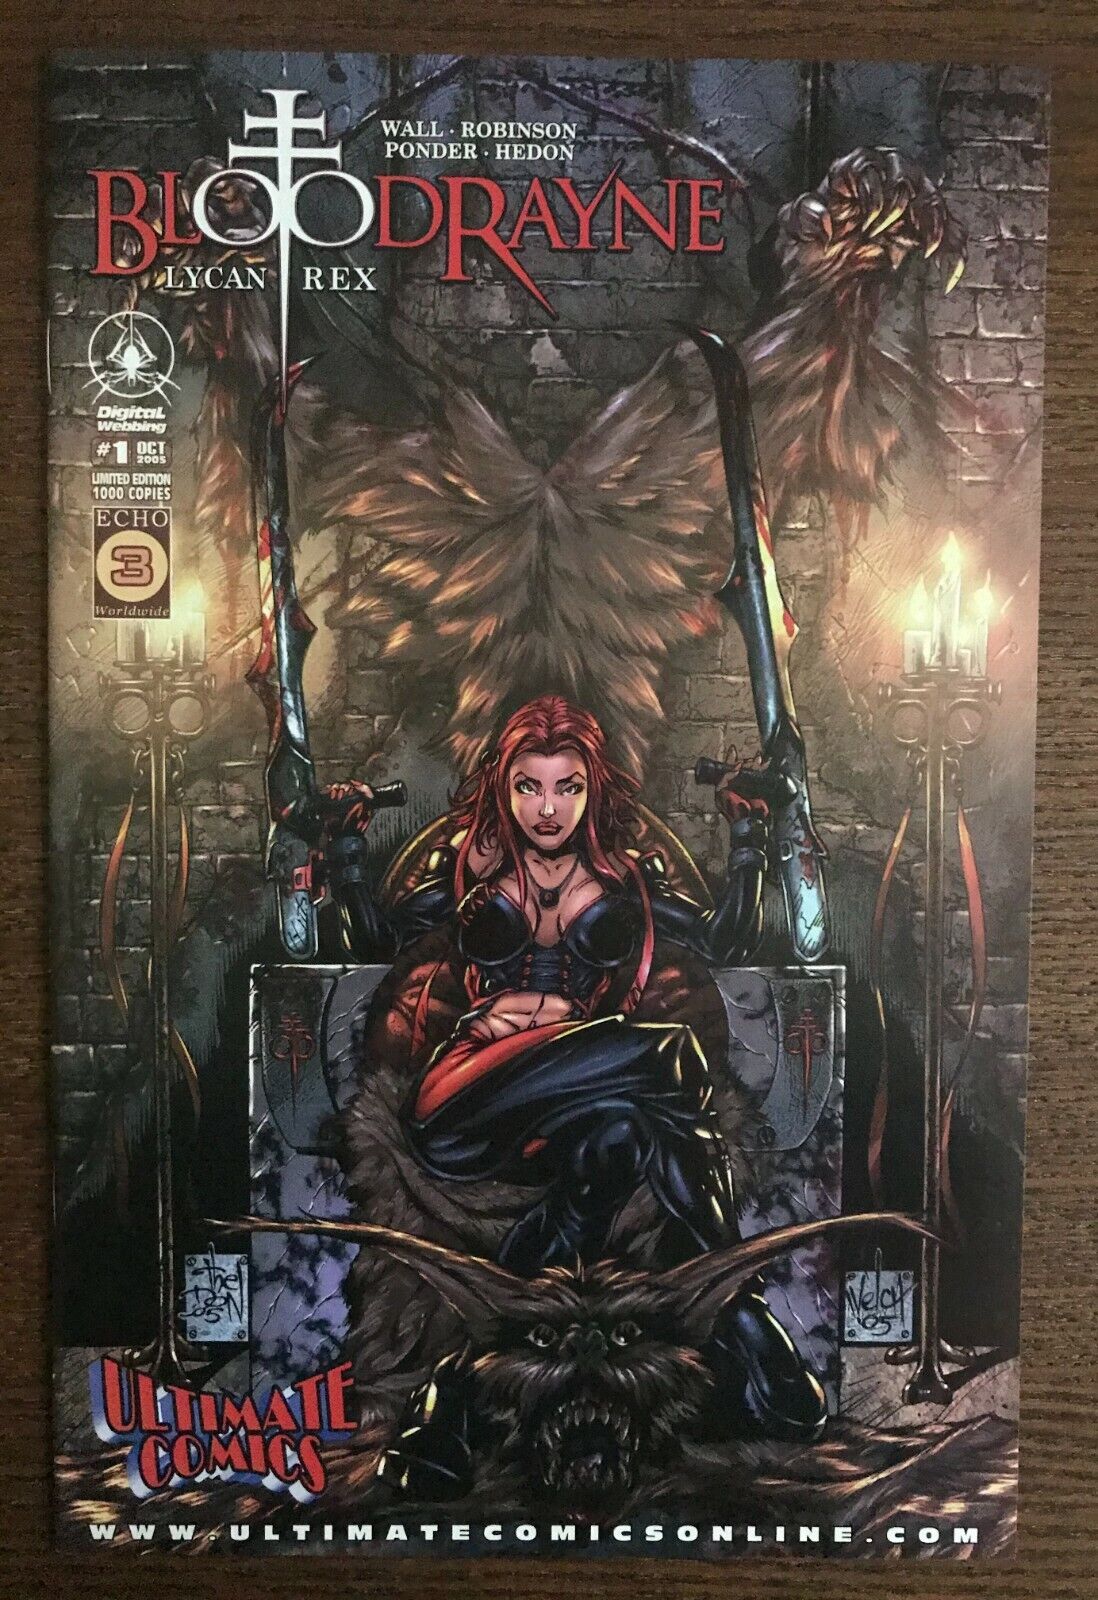 Bloodrayne Lycan Rex (2005) #1 Variant Limited to 1000